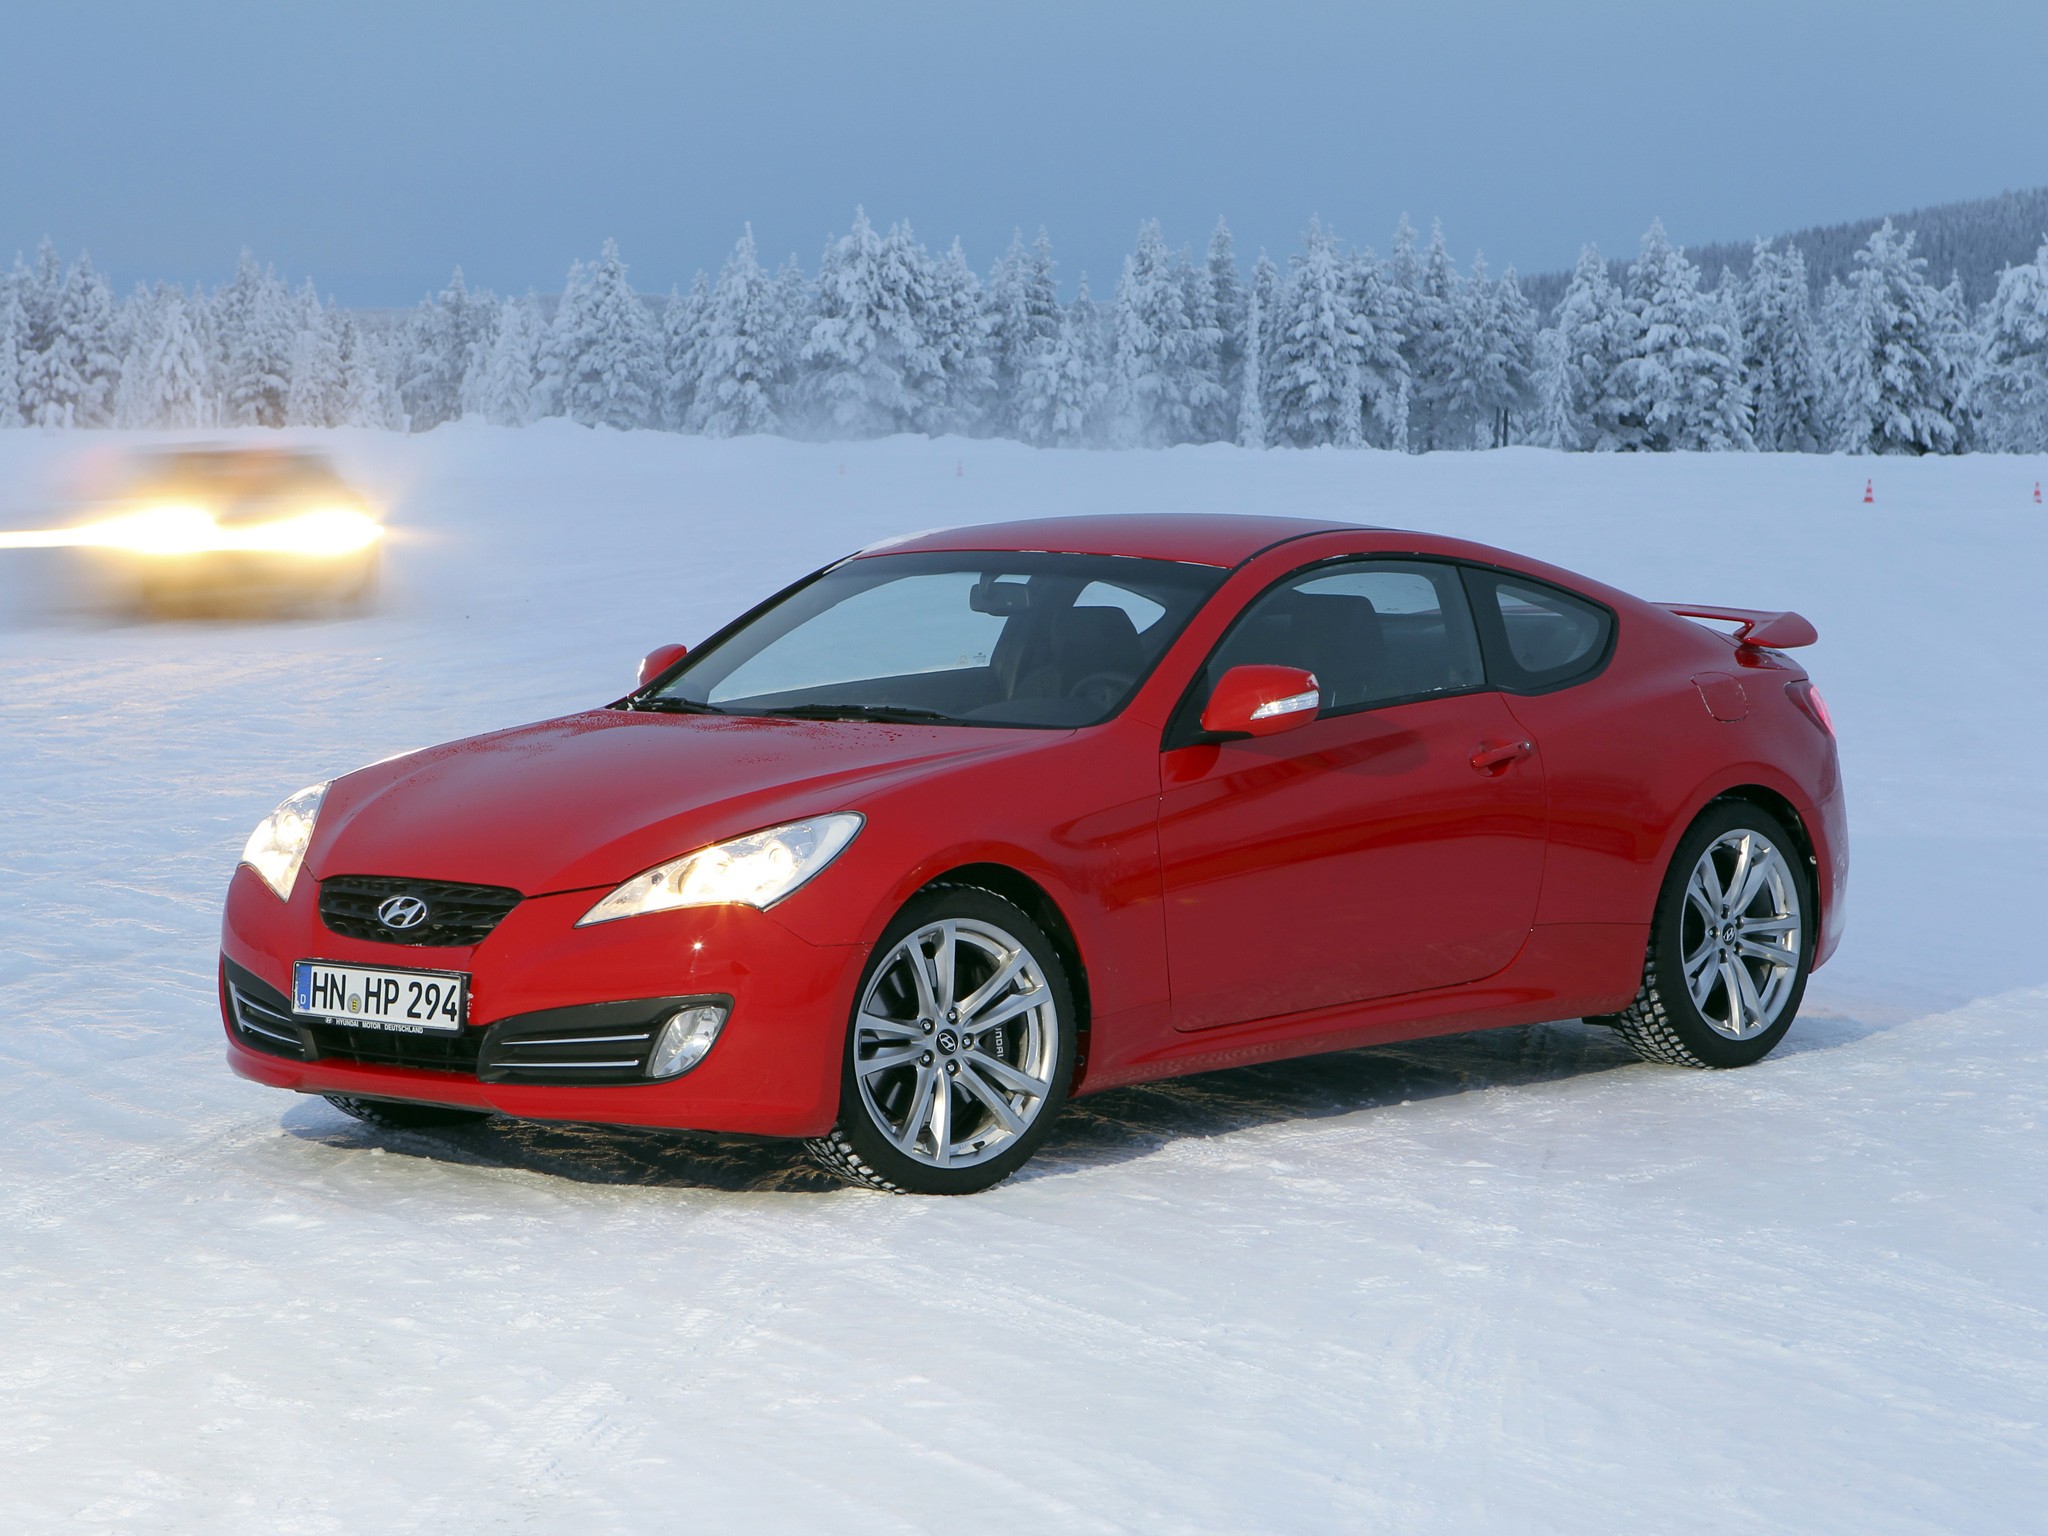 Hyundai Genesis Coupe Kicks the Bucket, Successor In the Offing ...